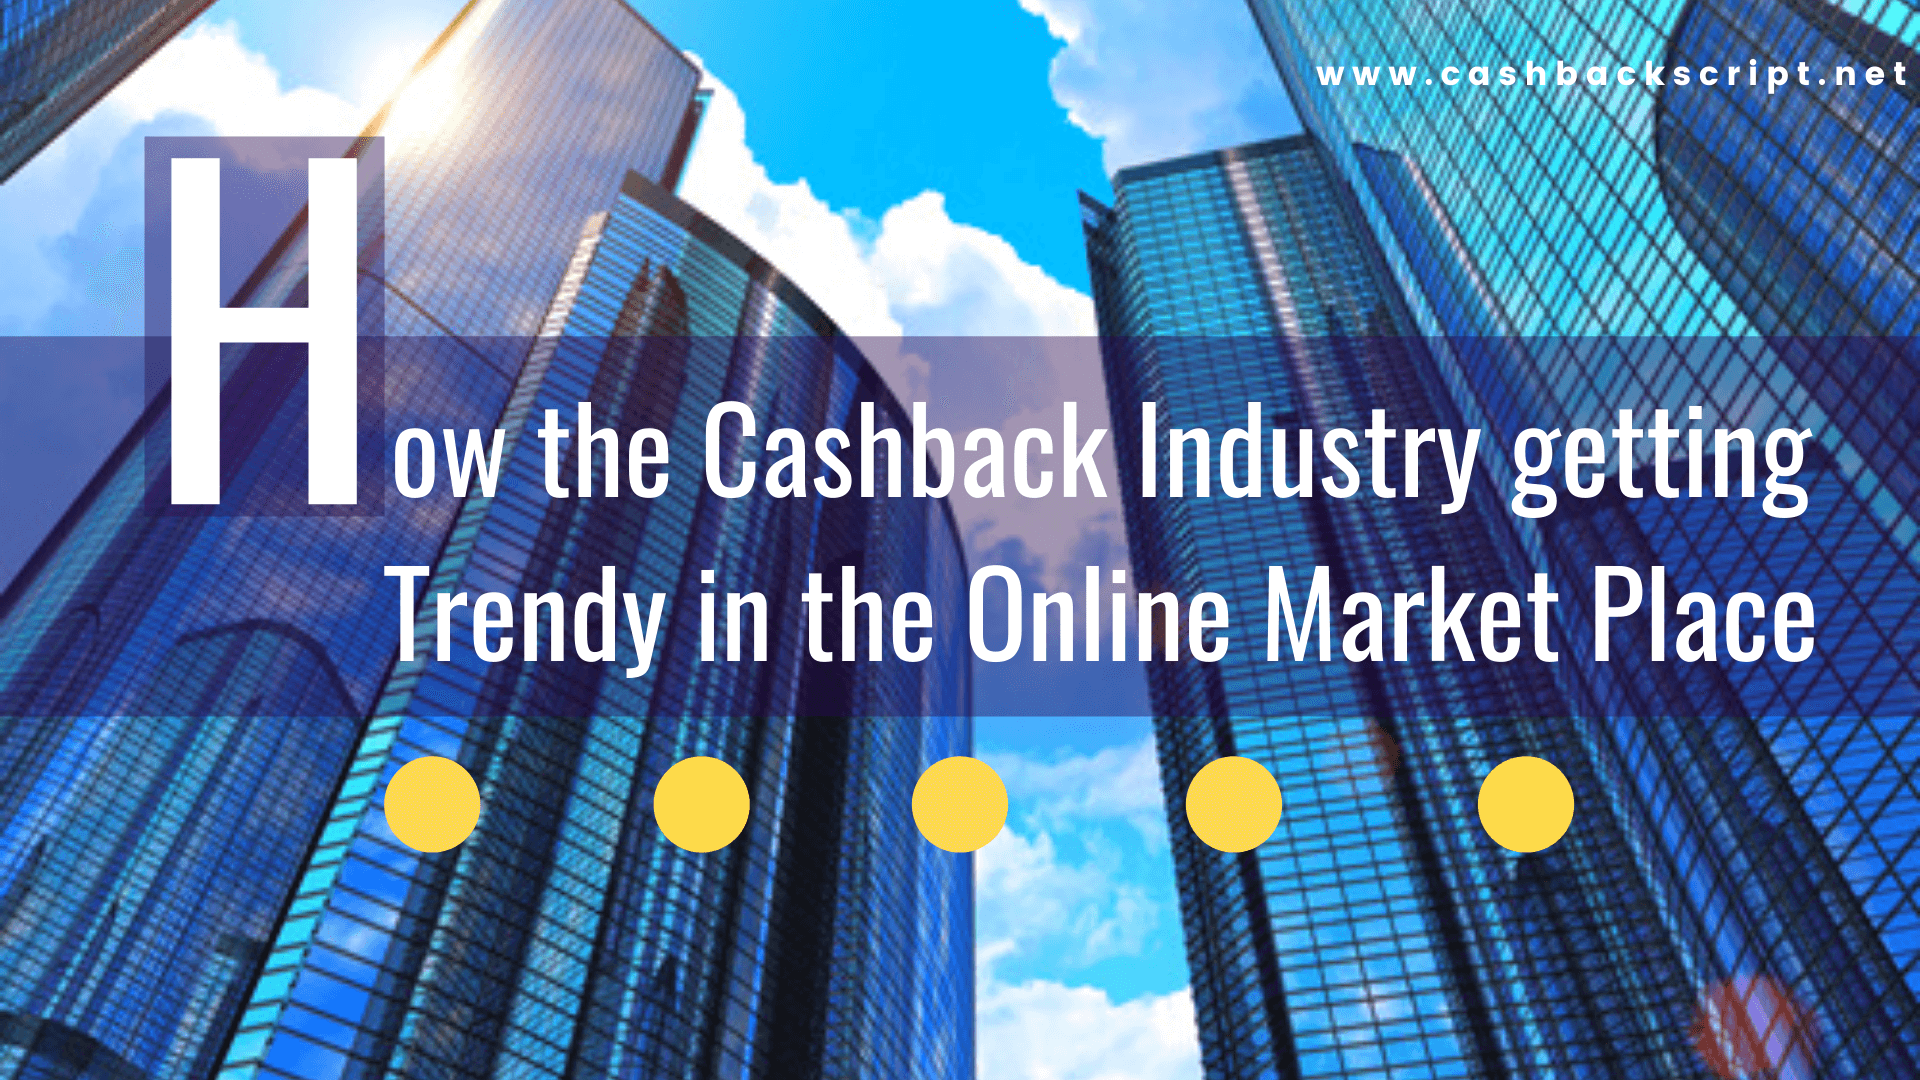 How the Cashback Industry Getting Trendy in the Online Market Place